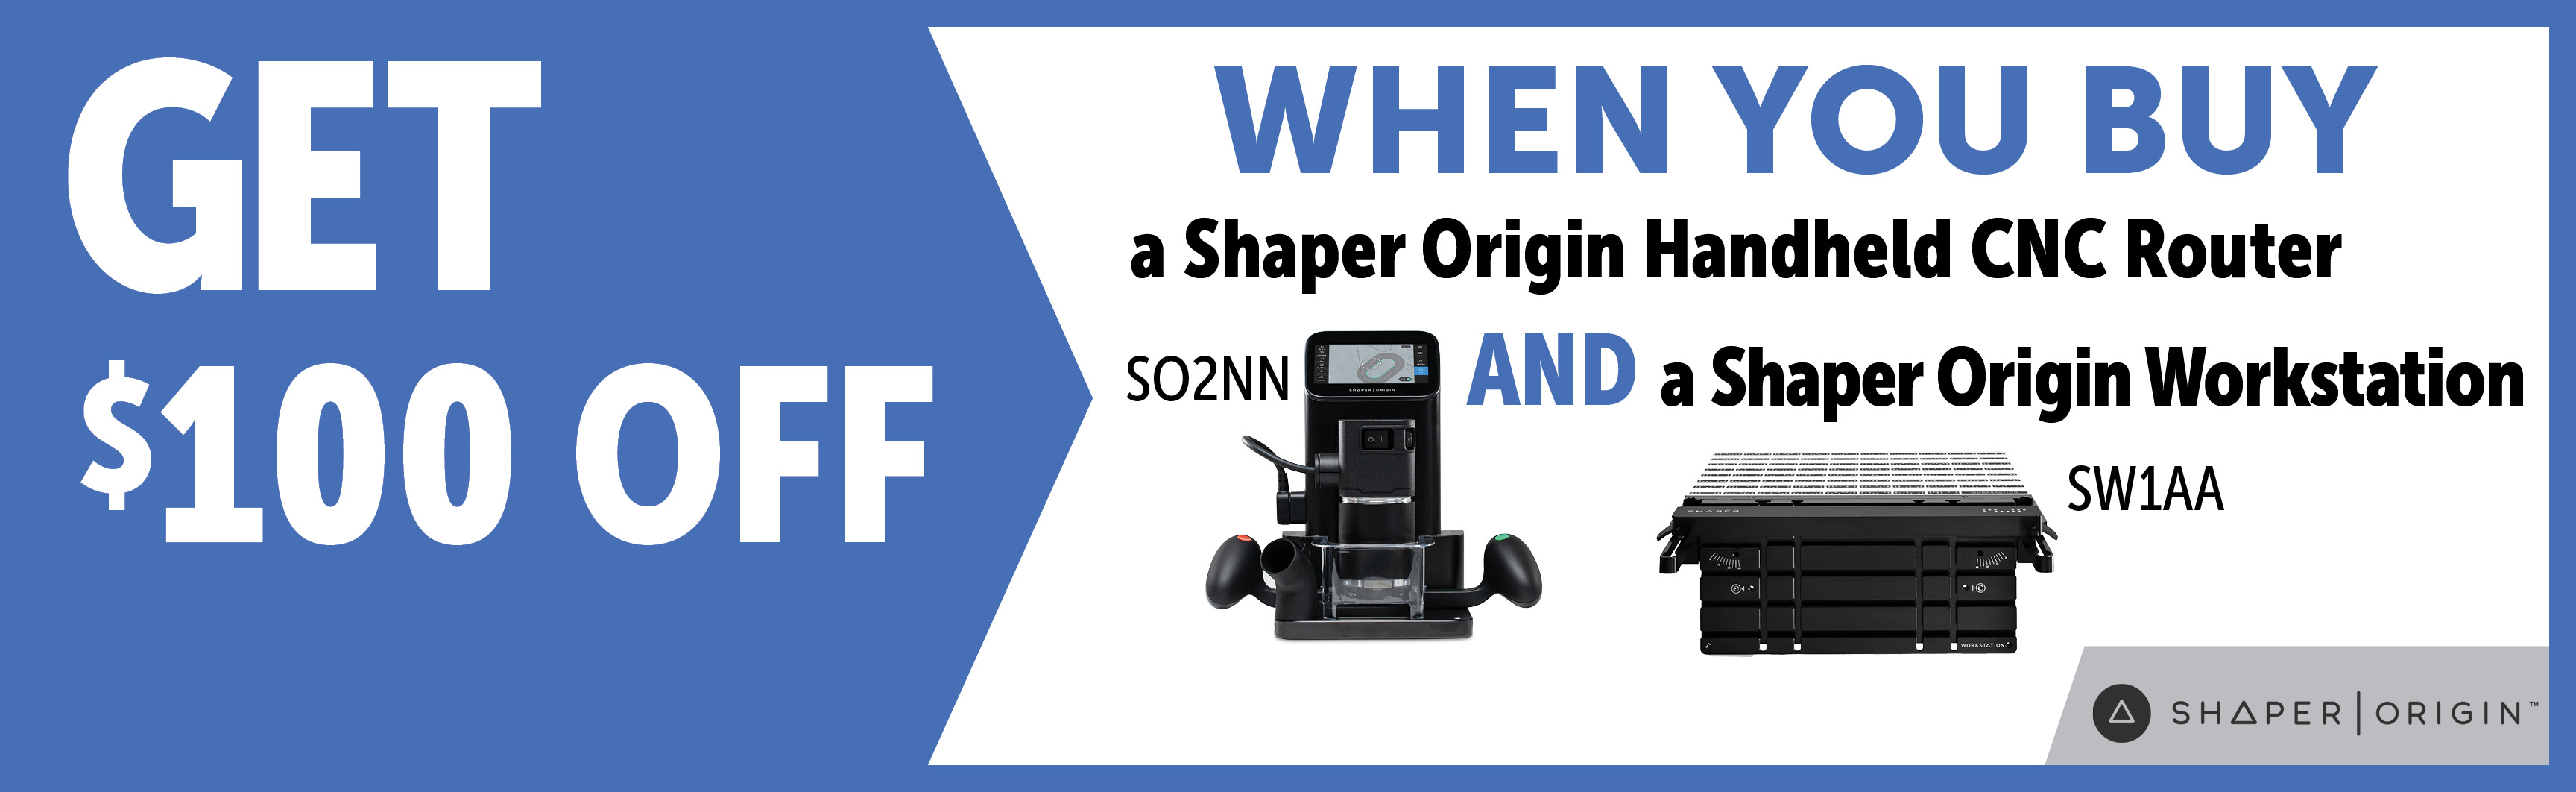 Shaper Tools Buy an Origin and Workstation get $100 OFF